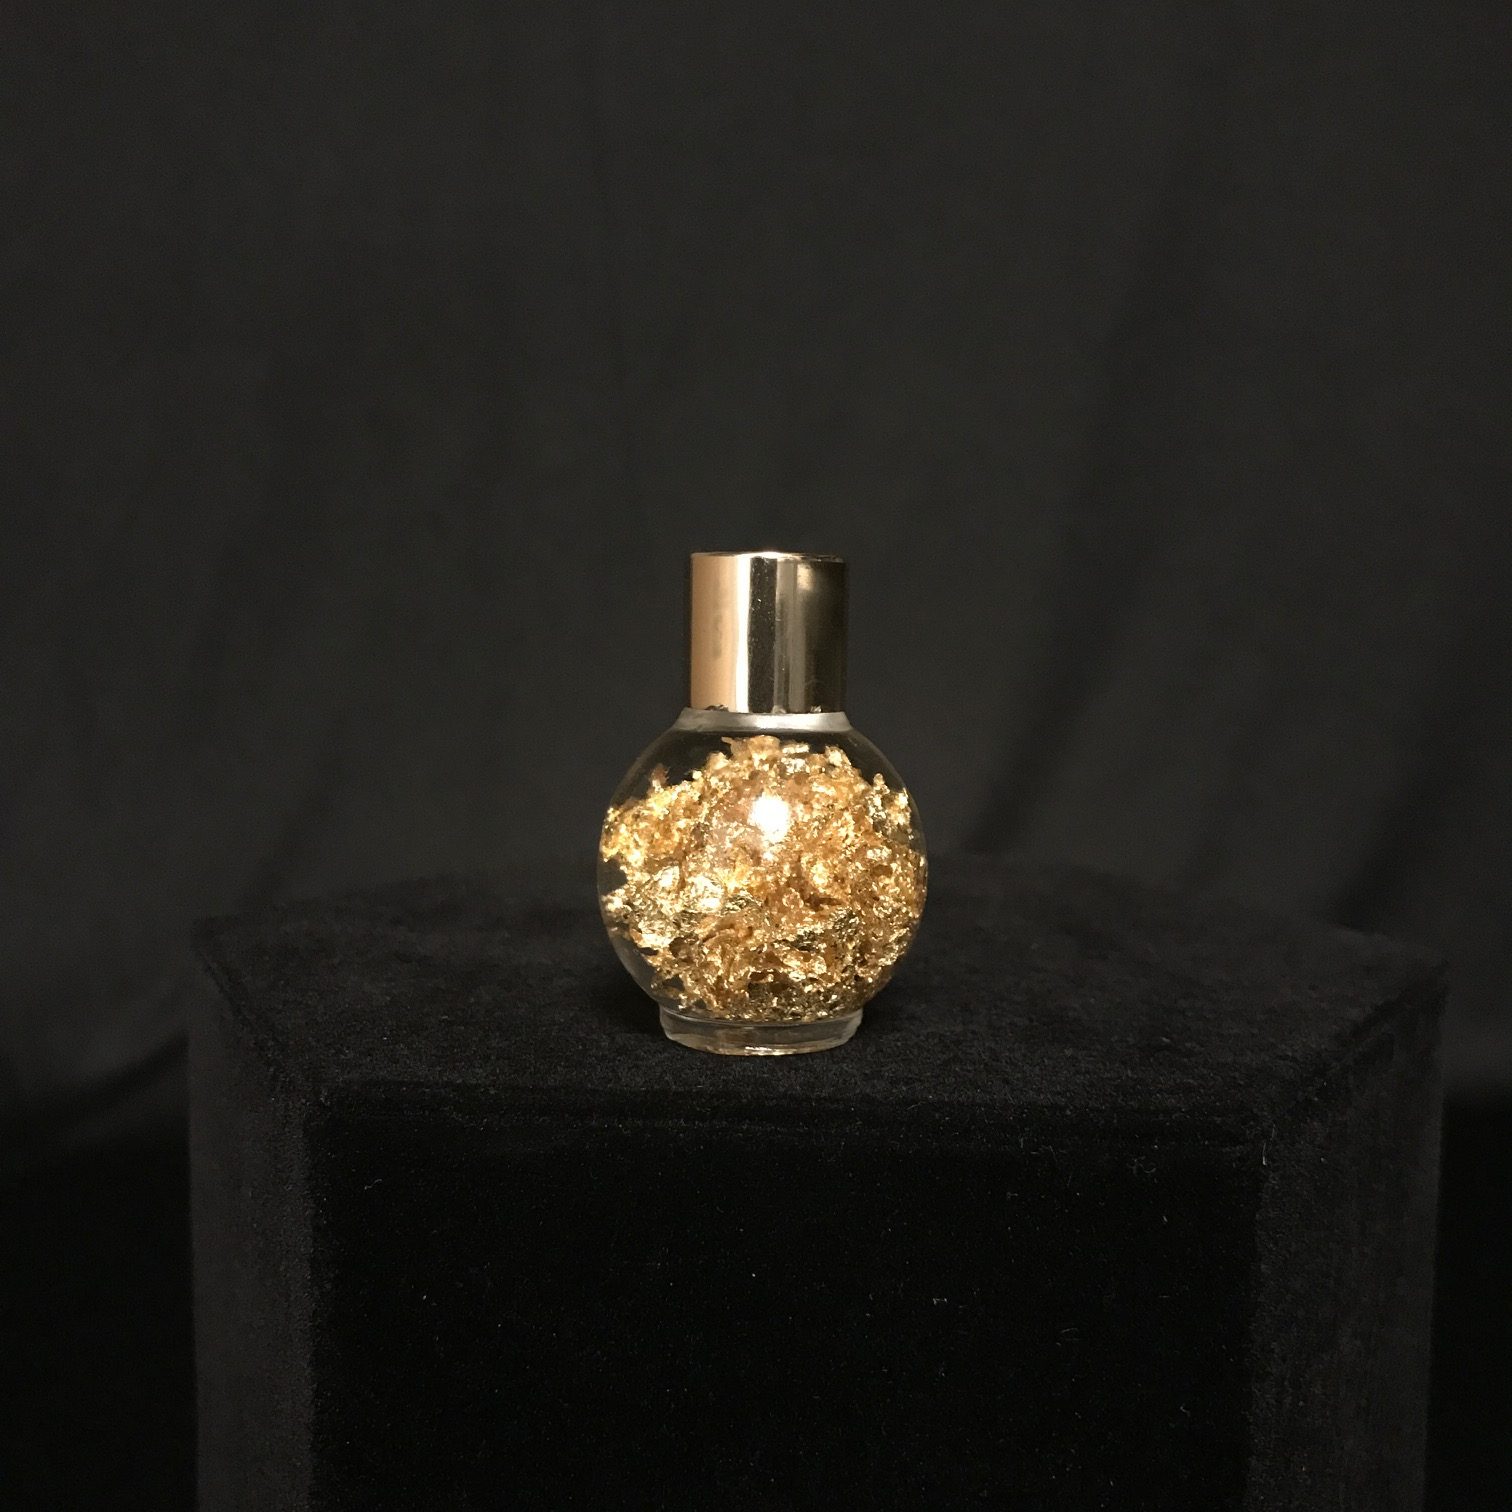 Captivating bottle of gold flakes, suspended in liquid, available at natur.